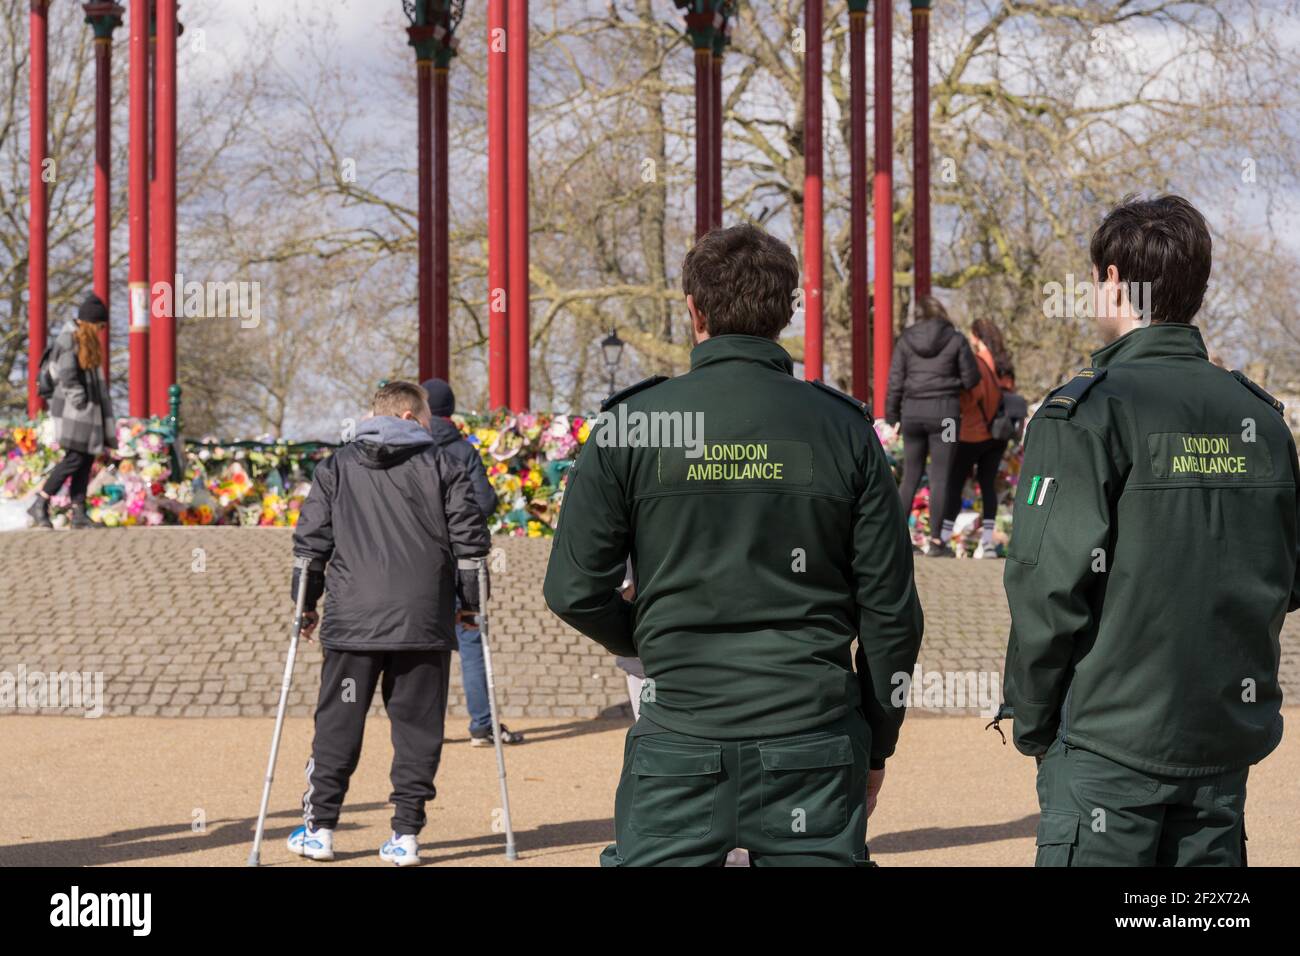 two ambulance staffs pay floral tributes at Clapham Common bandstand in memory of Sarah Everard, kidnaped and murdered , London, England Stock Photo